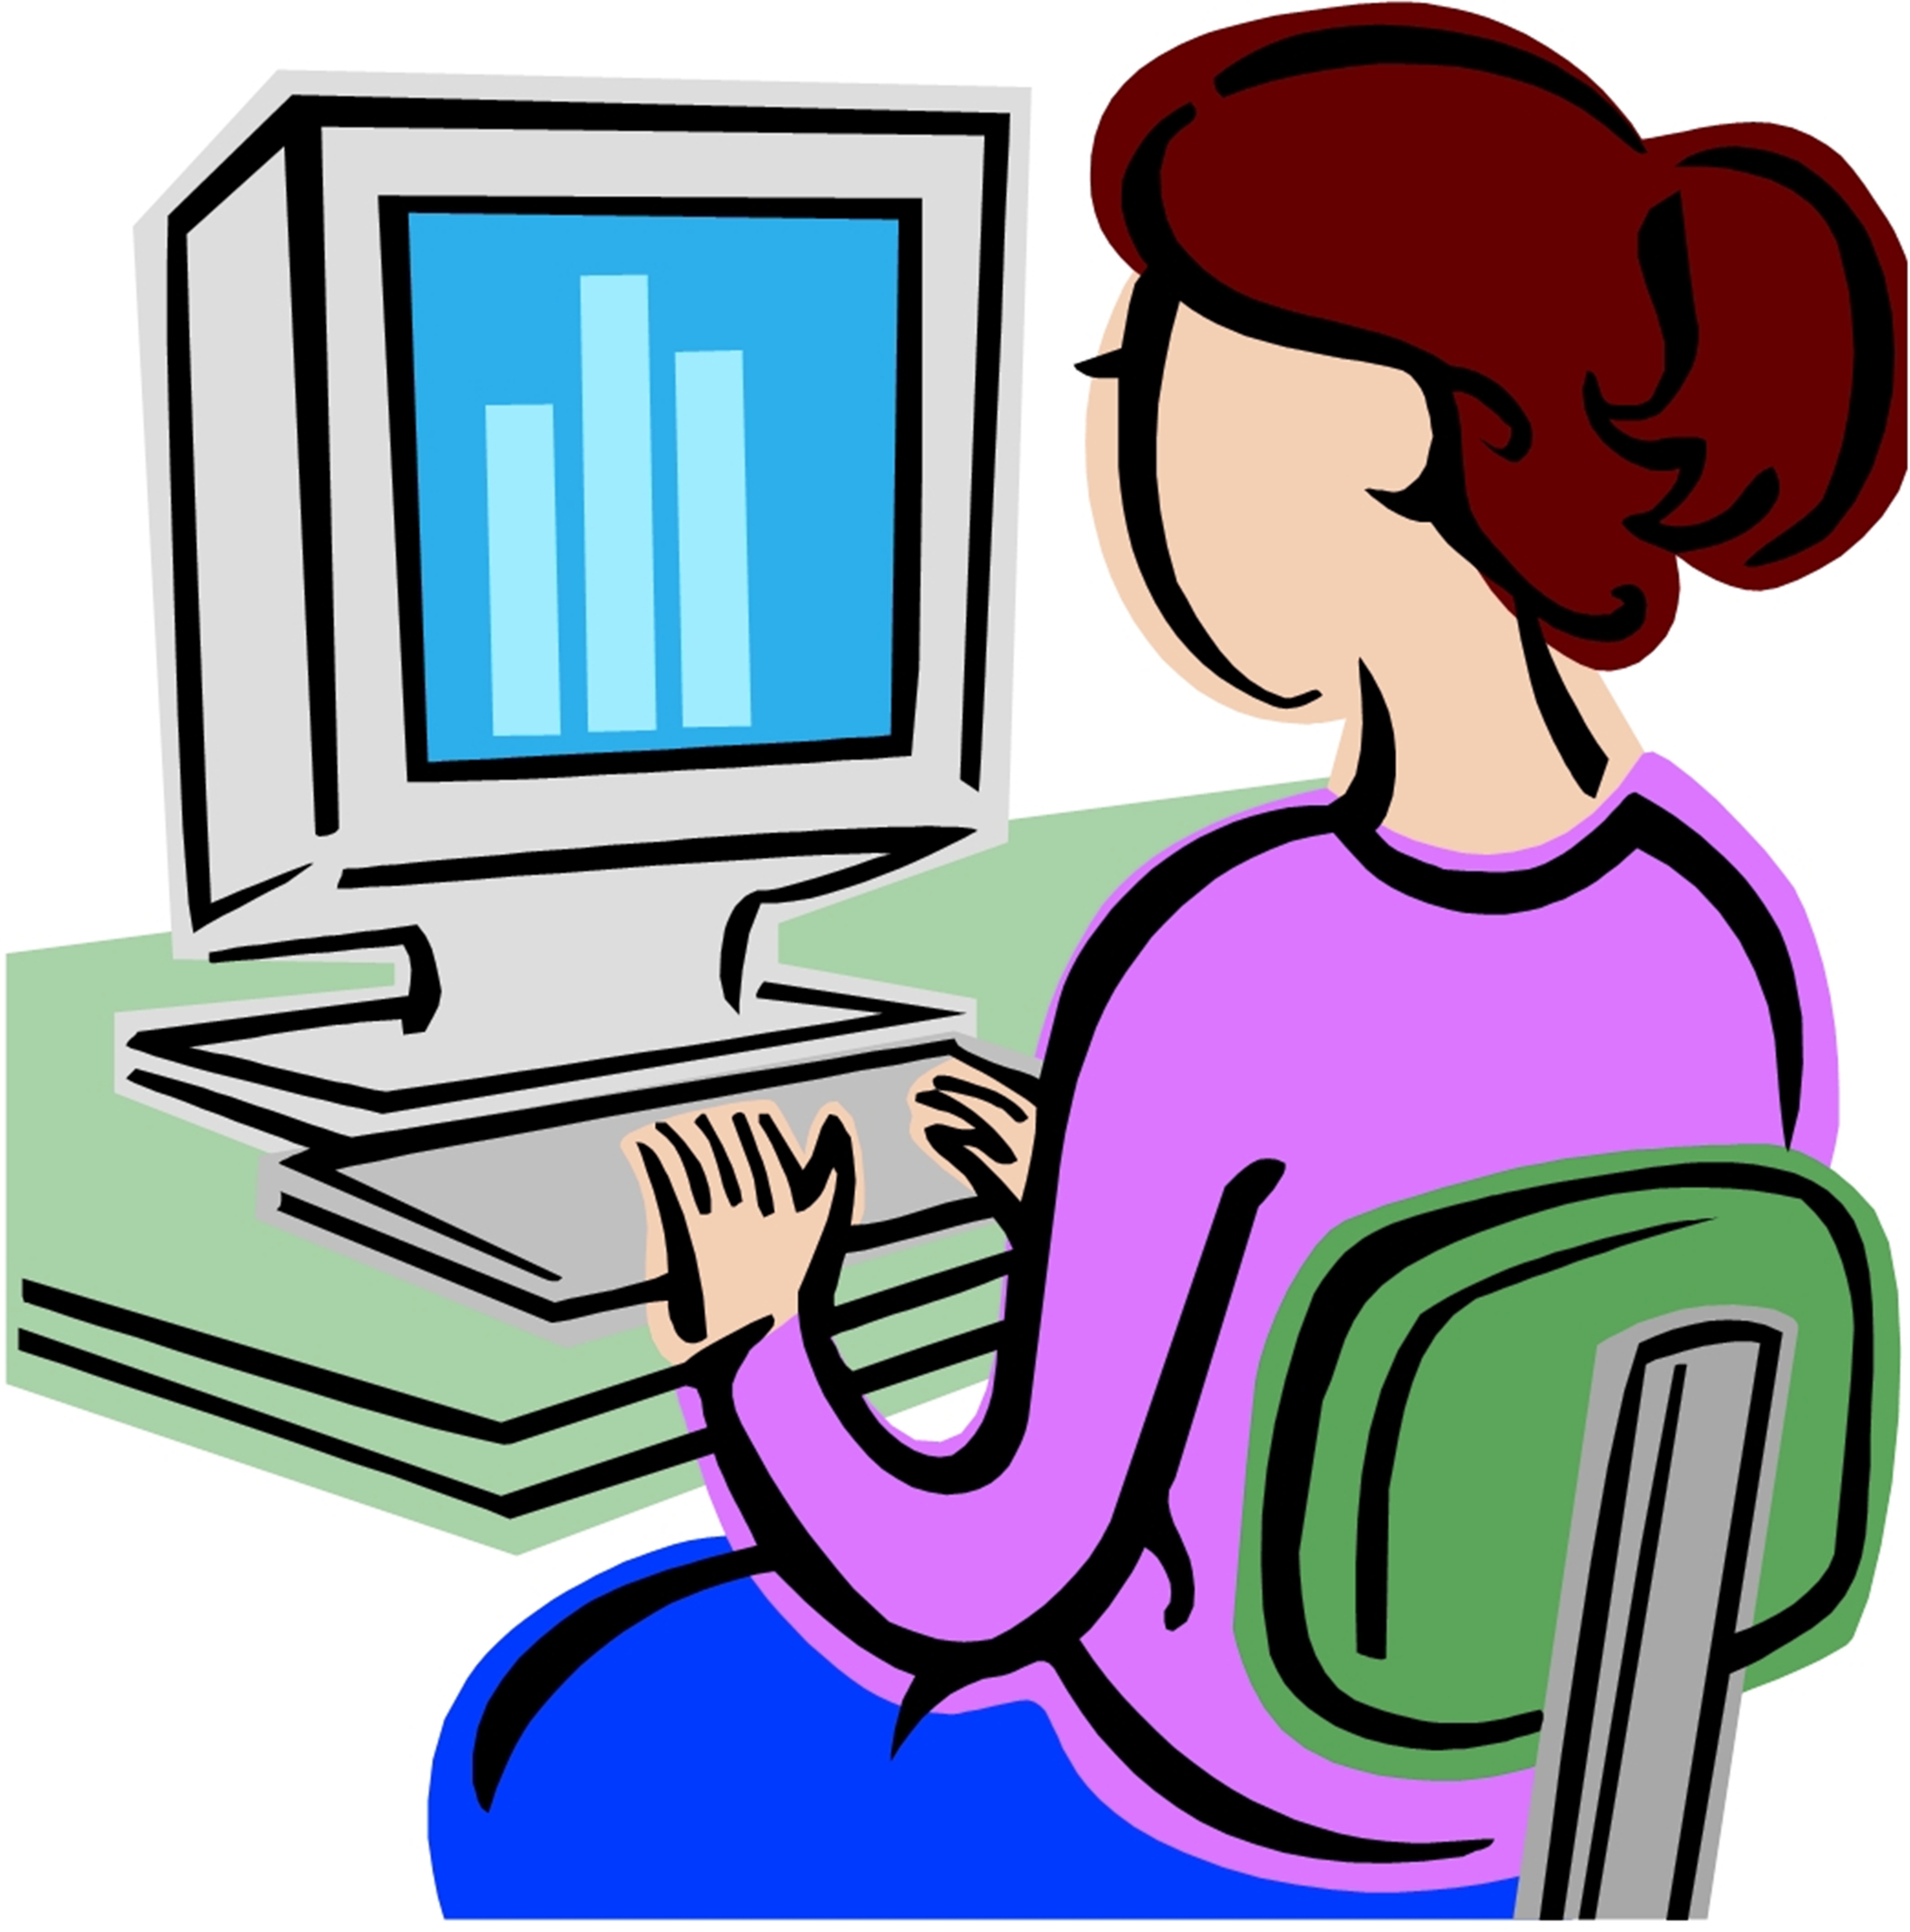 Computer Clipart Image A